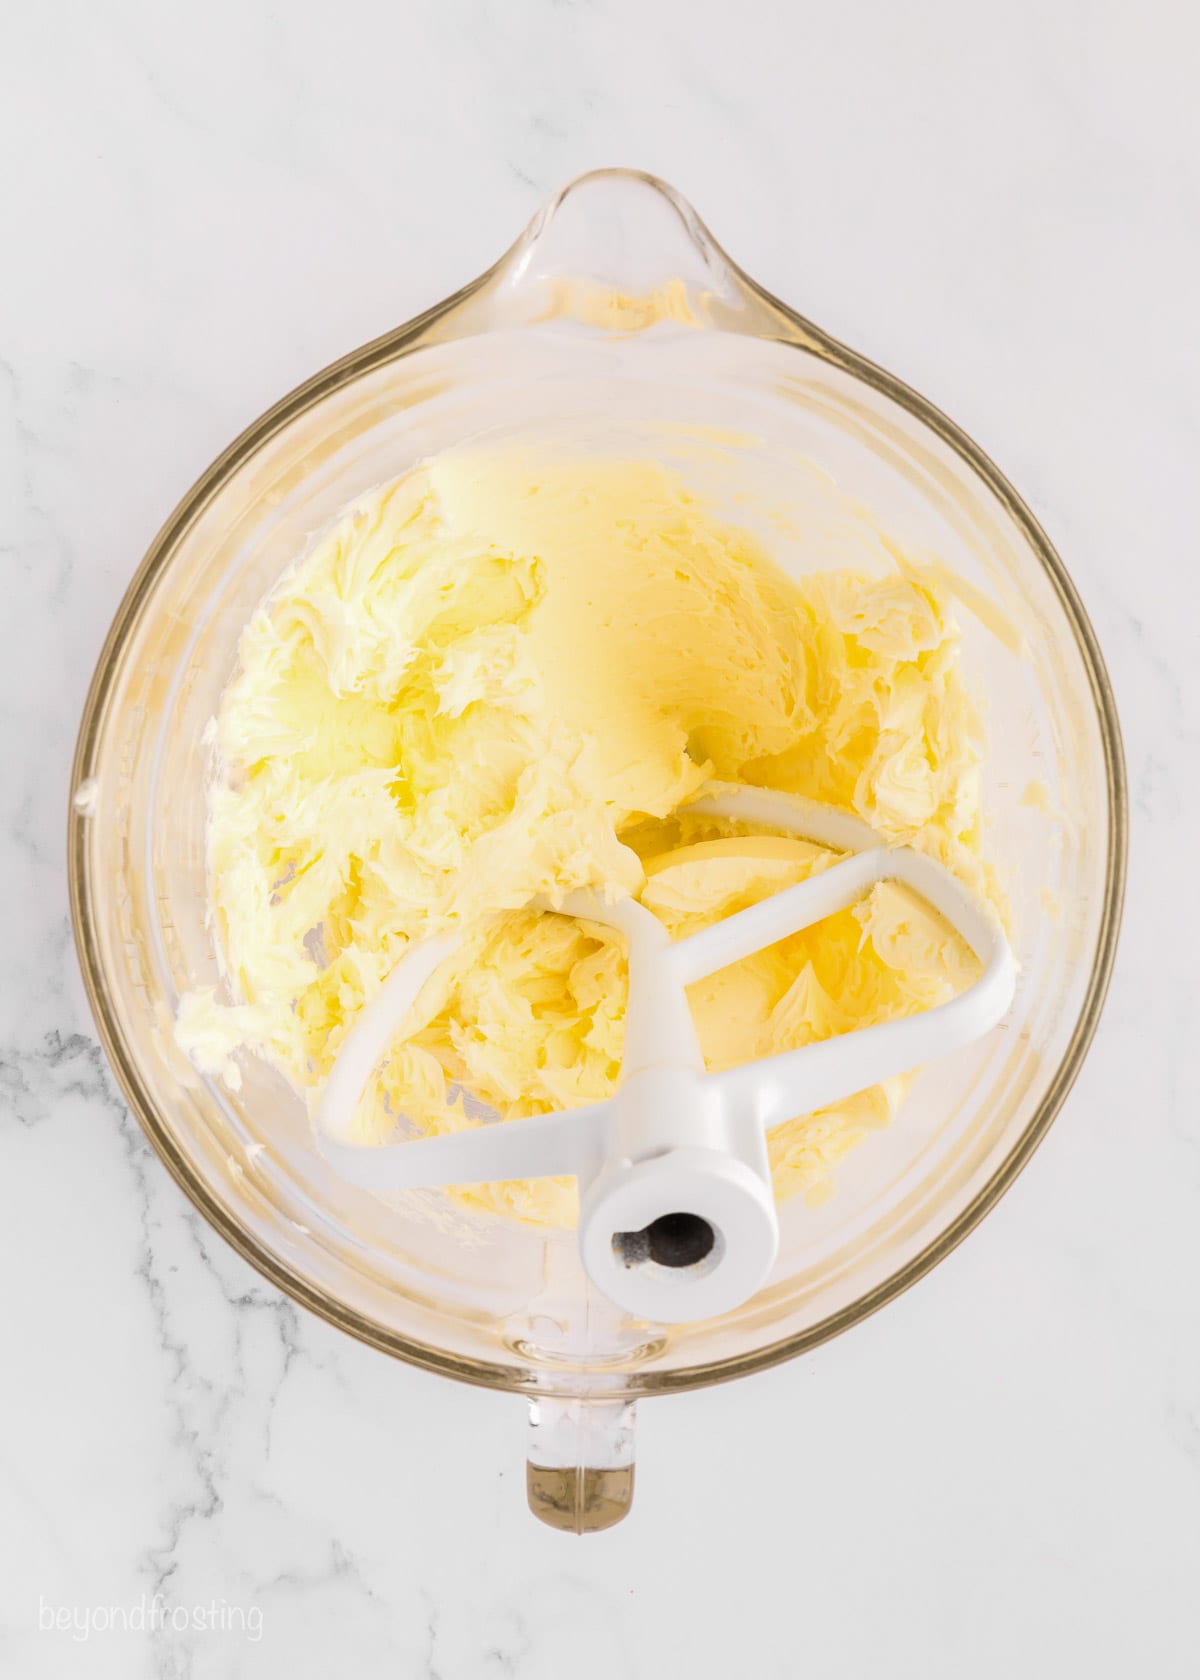 A stand mixer attachment resting in a bowl of whipped buttercream frosting ingredients.